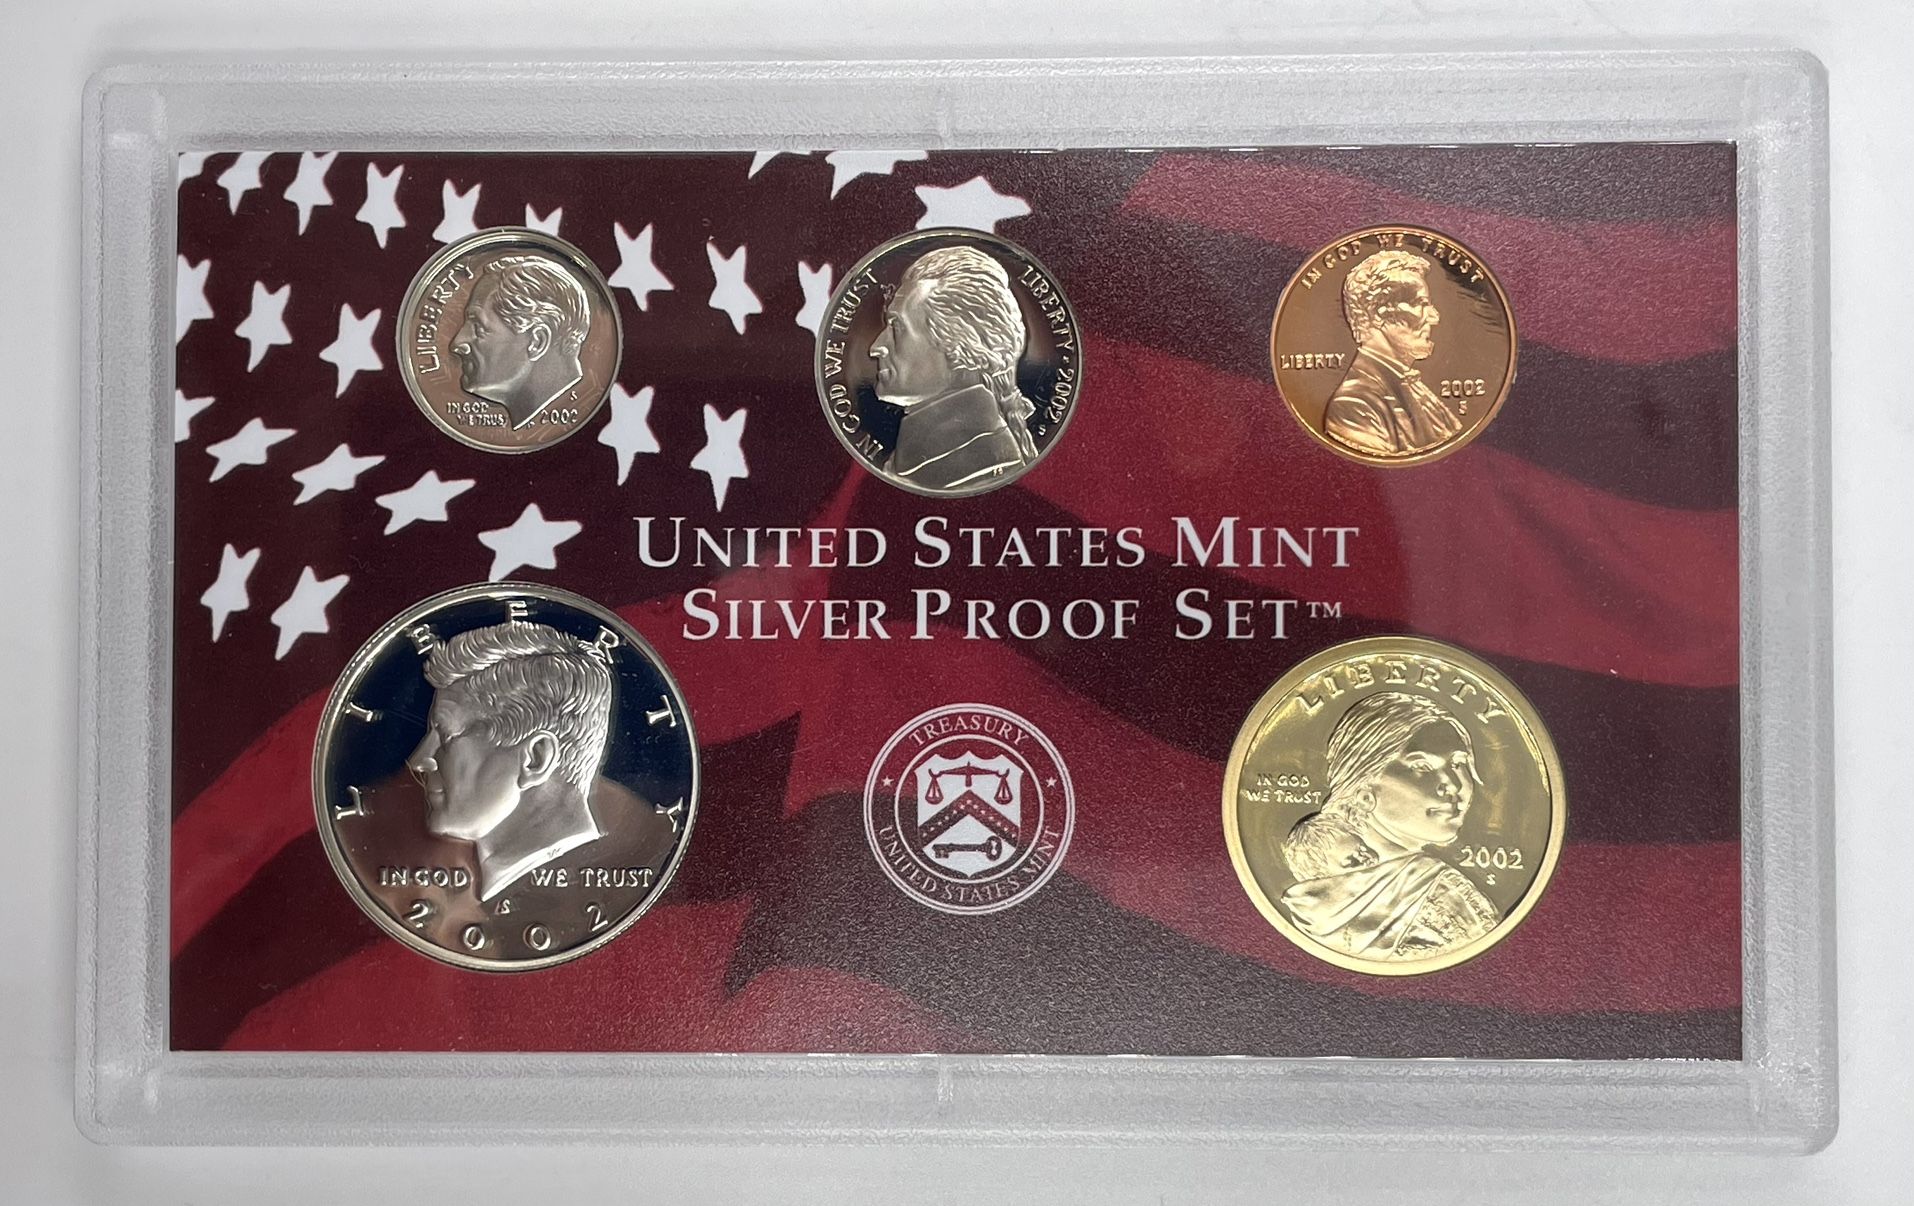 2002 United States Mint Silver Proof Set 